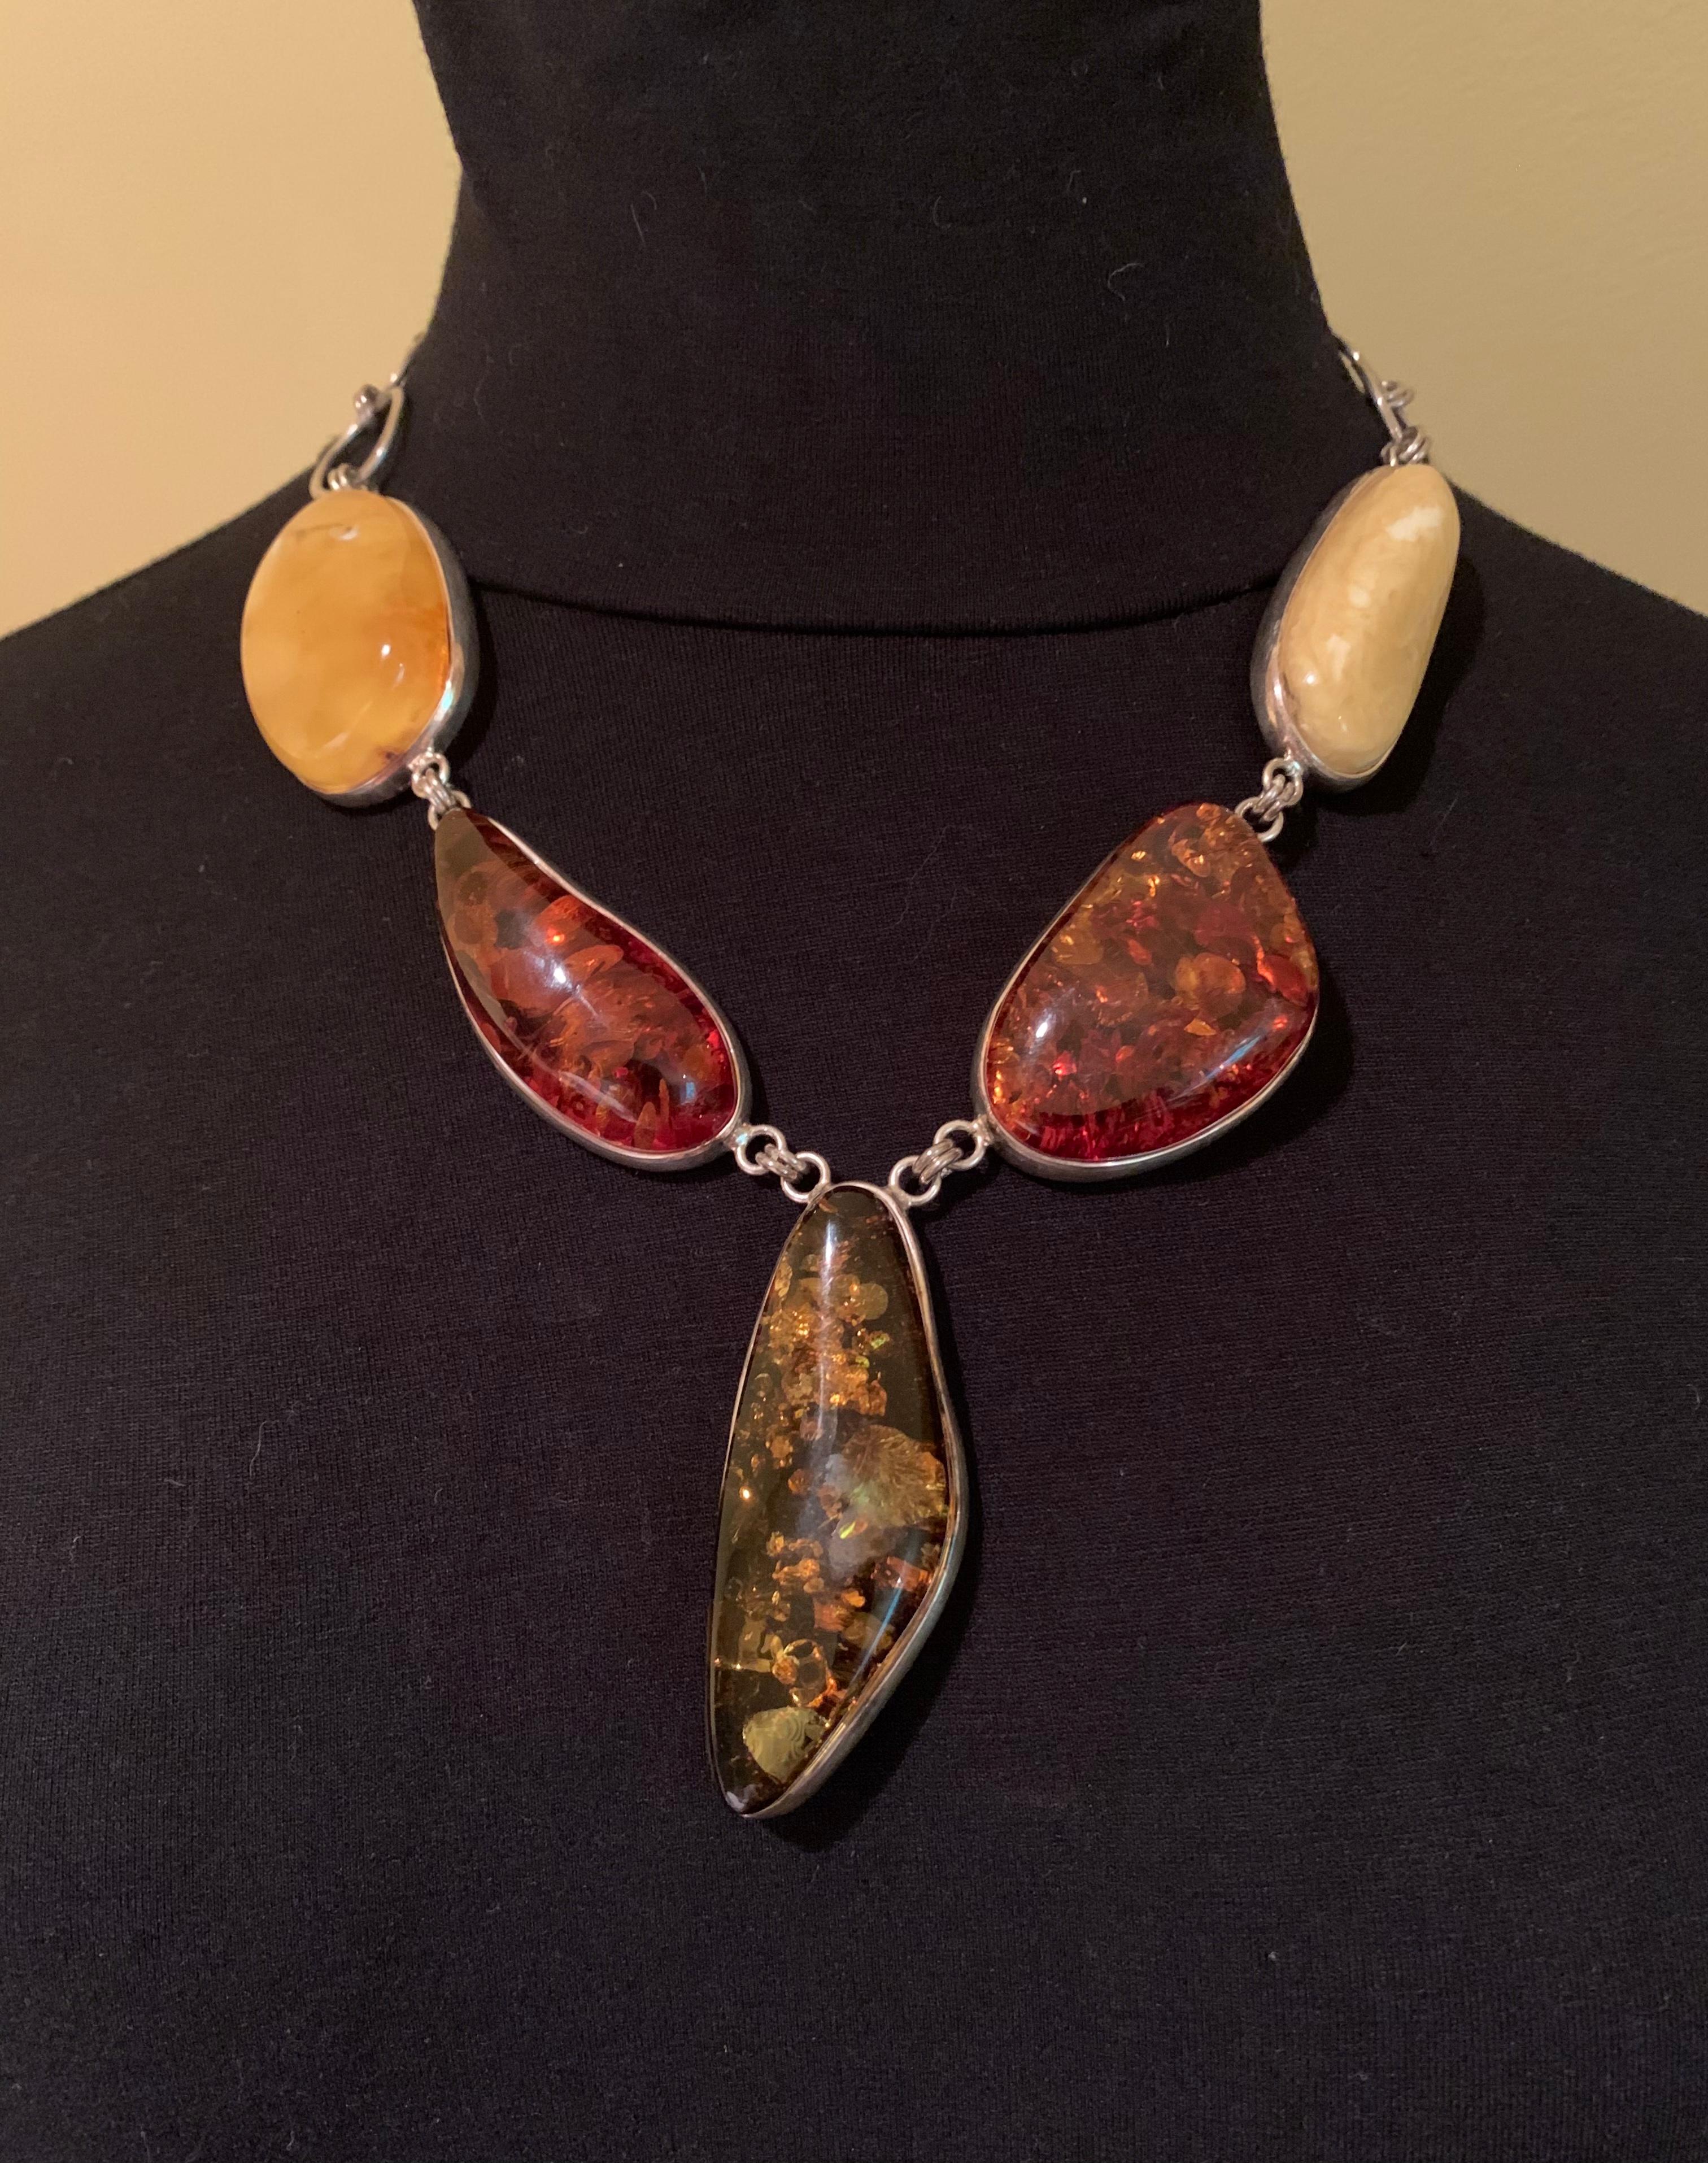 Spectacular Scandi Modernist natural amber and sterling silver statement necklace composed of five very large pieces of amber in shades of butterscotch yellow, honey and olive. the center piece measuring 2.5 inches in length. Each naturally formed,